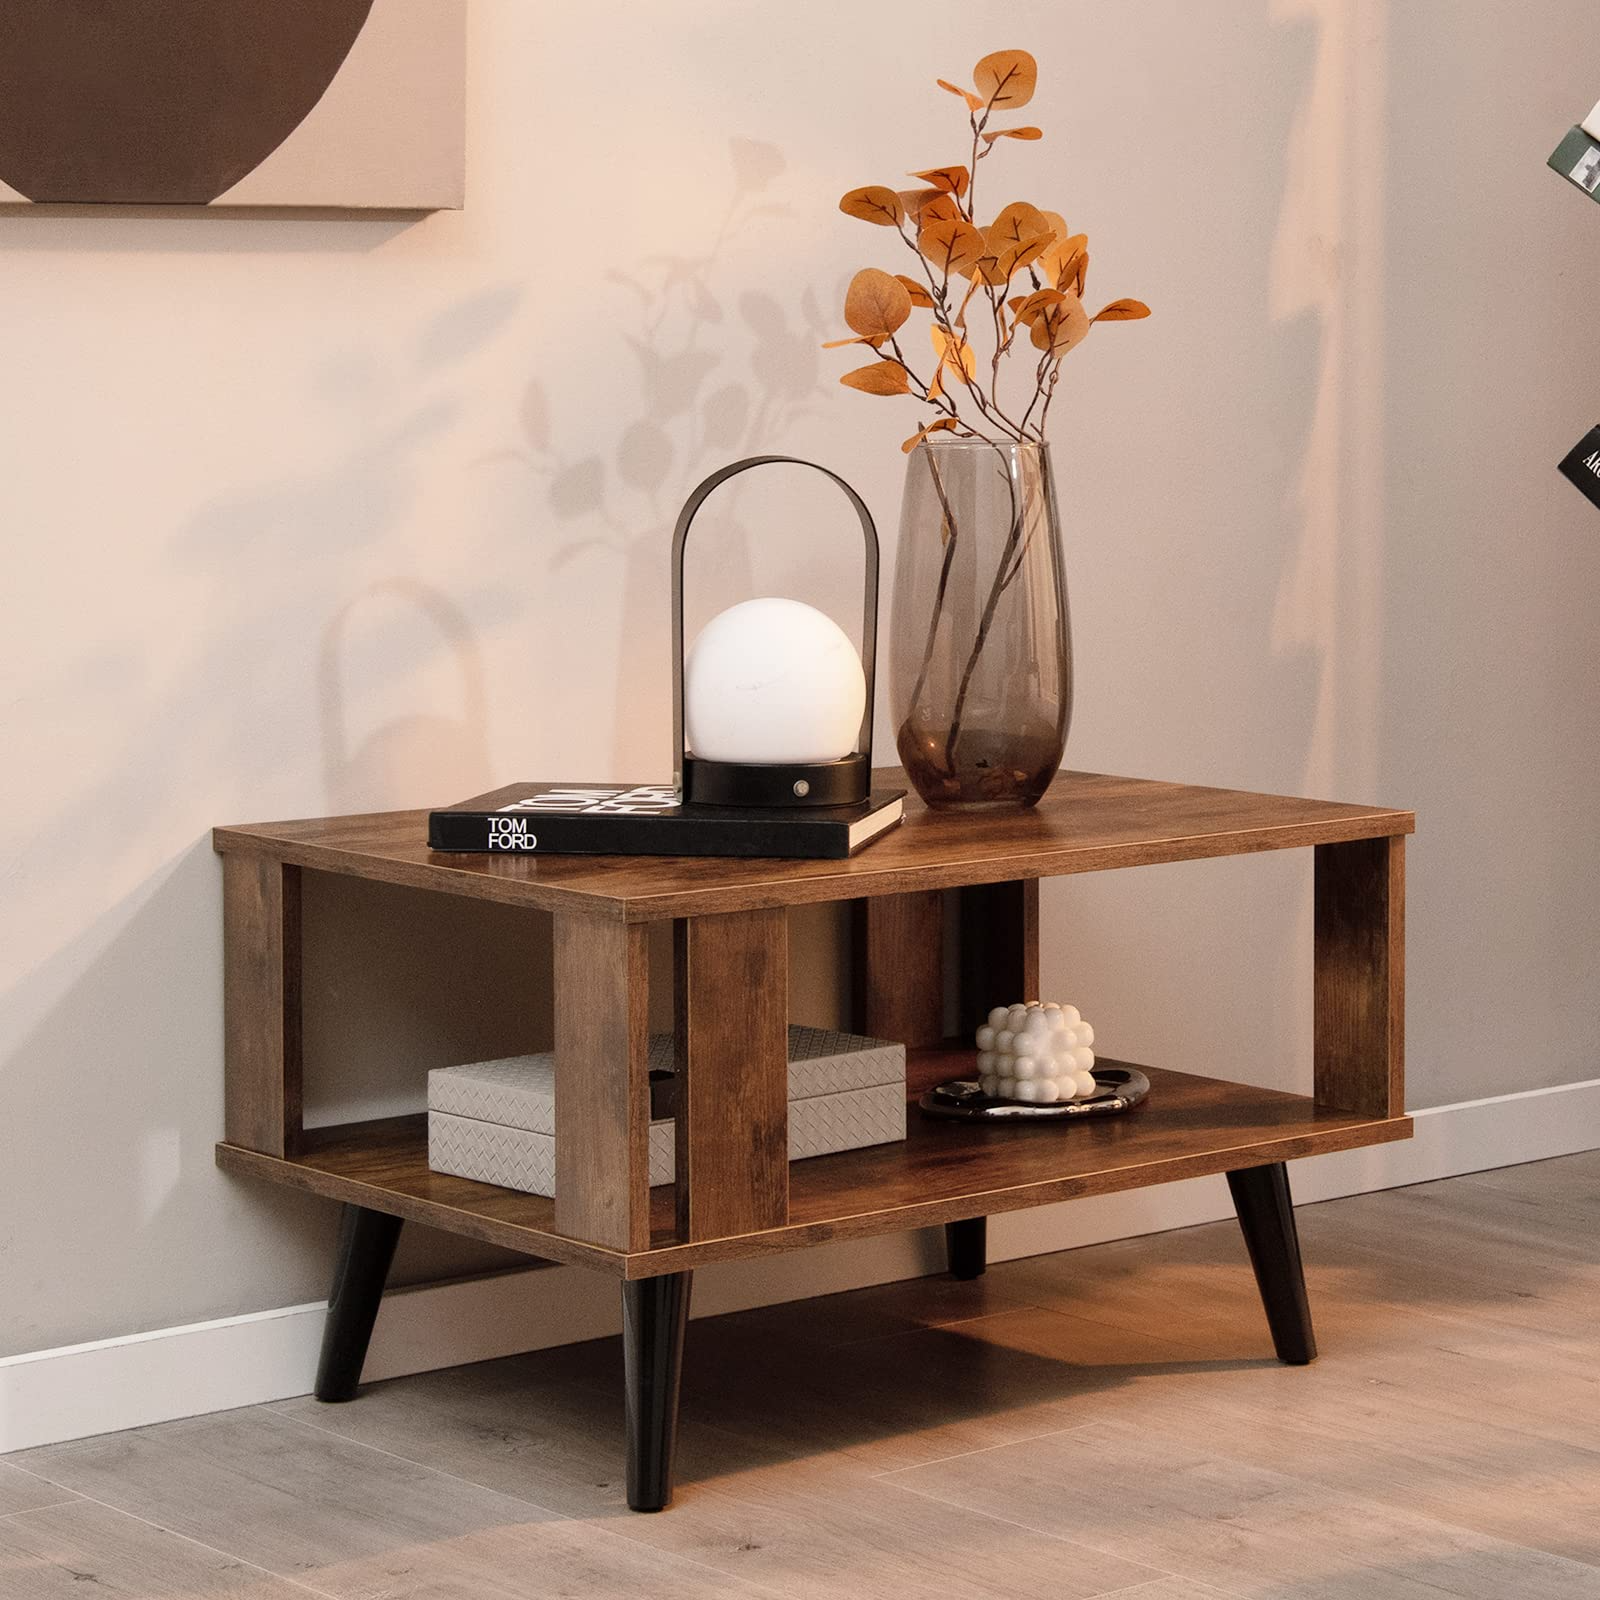 Small Coffee Table for Small Space - Tangkula